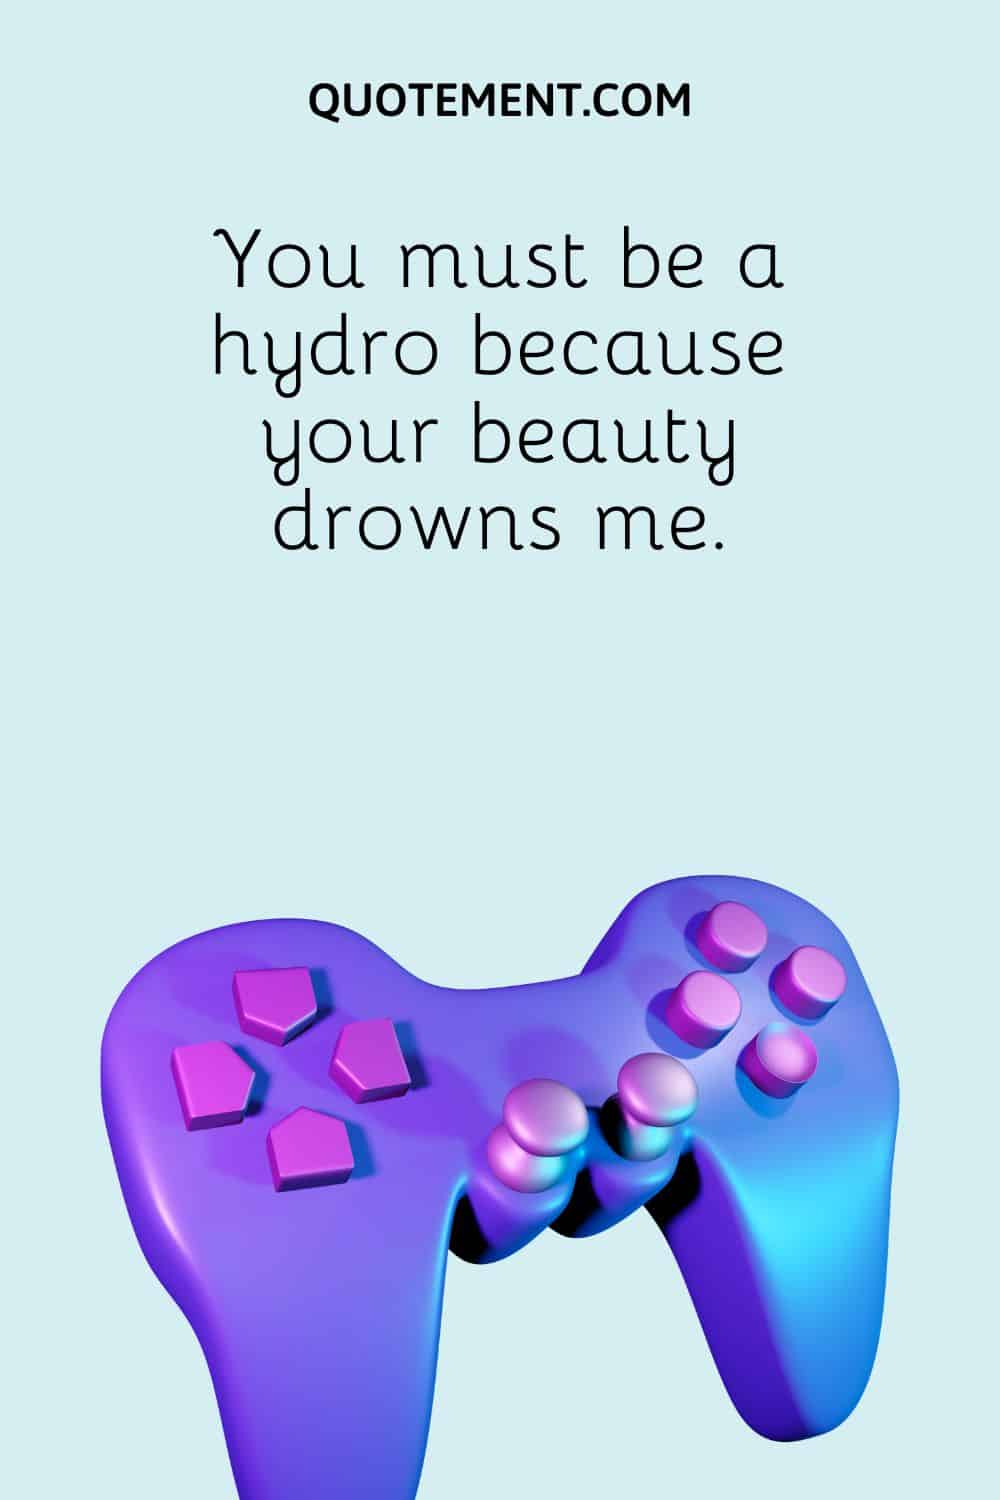 You must be a hydro because your beauty drowns me.